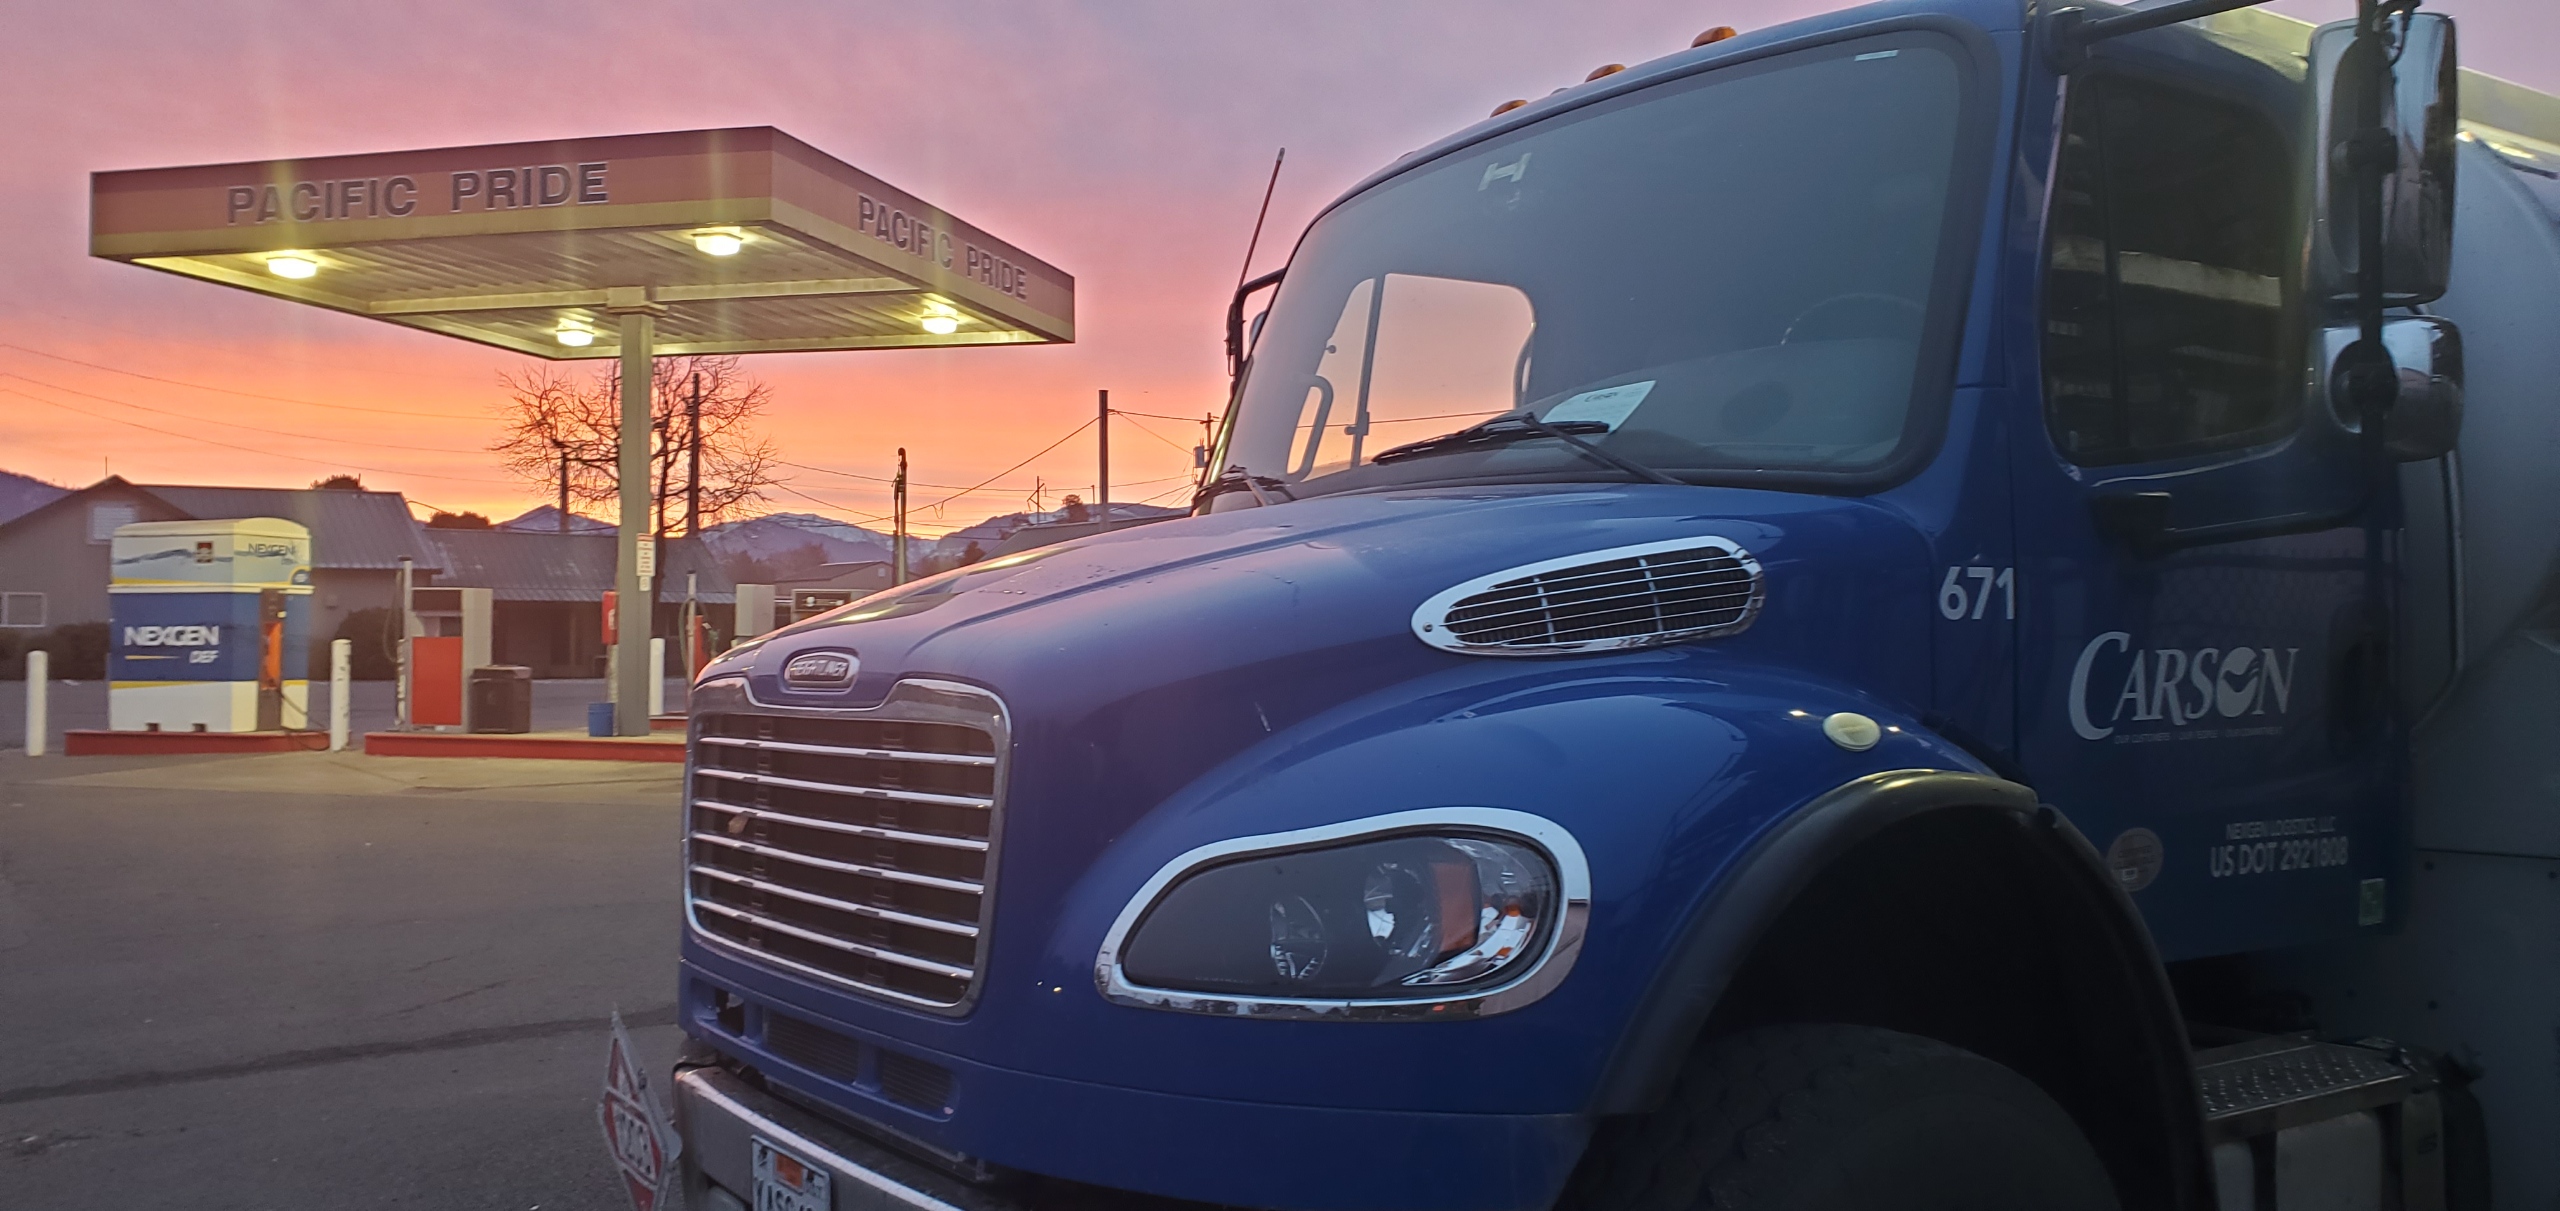 Carson truck in front of Pacific Pride cardlock station with a NEXGEN DEF pump. The sun is setting and the sky is a soft pink.